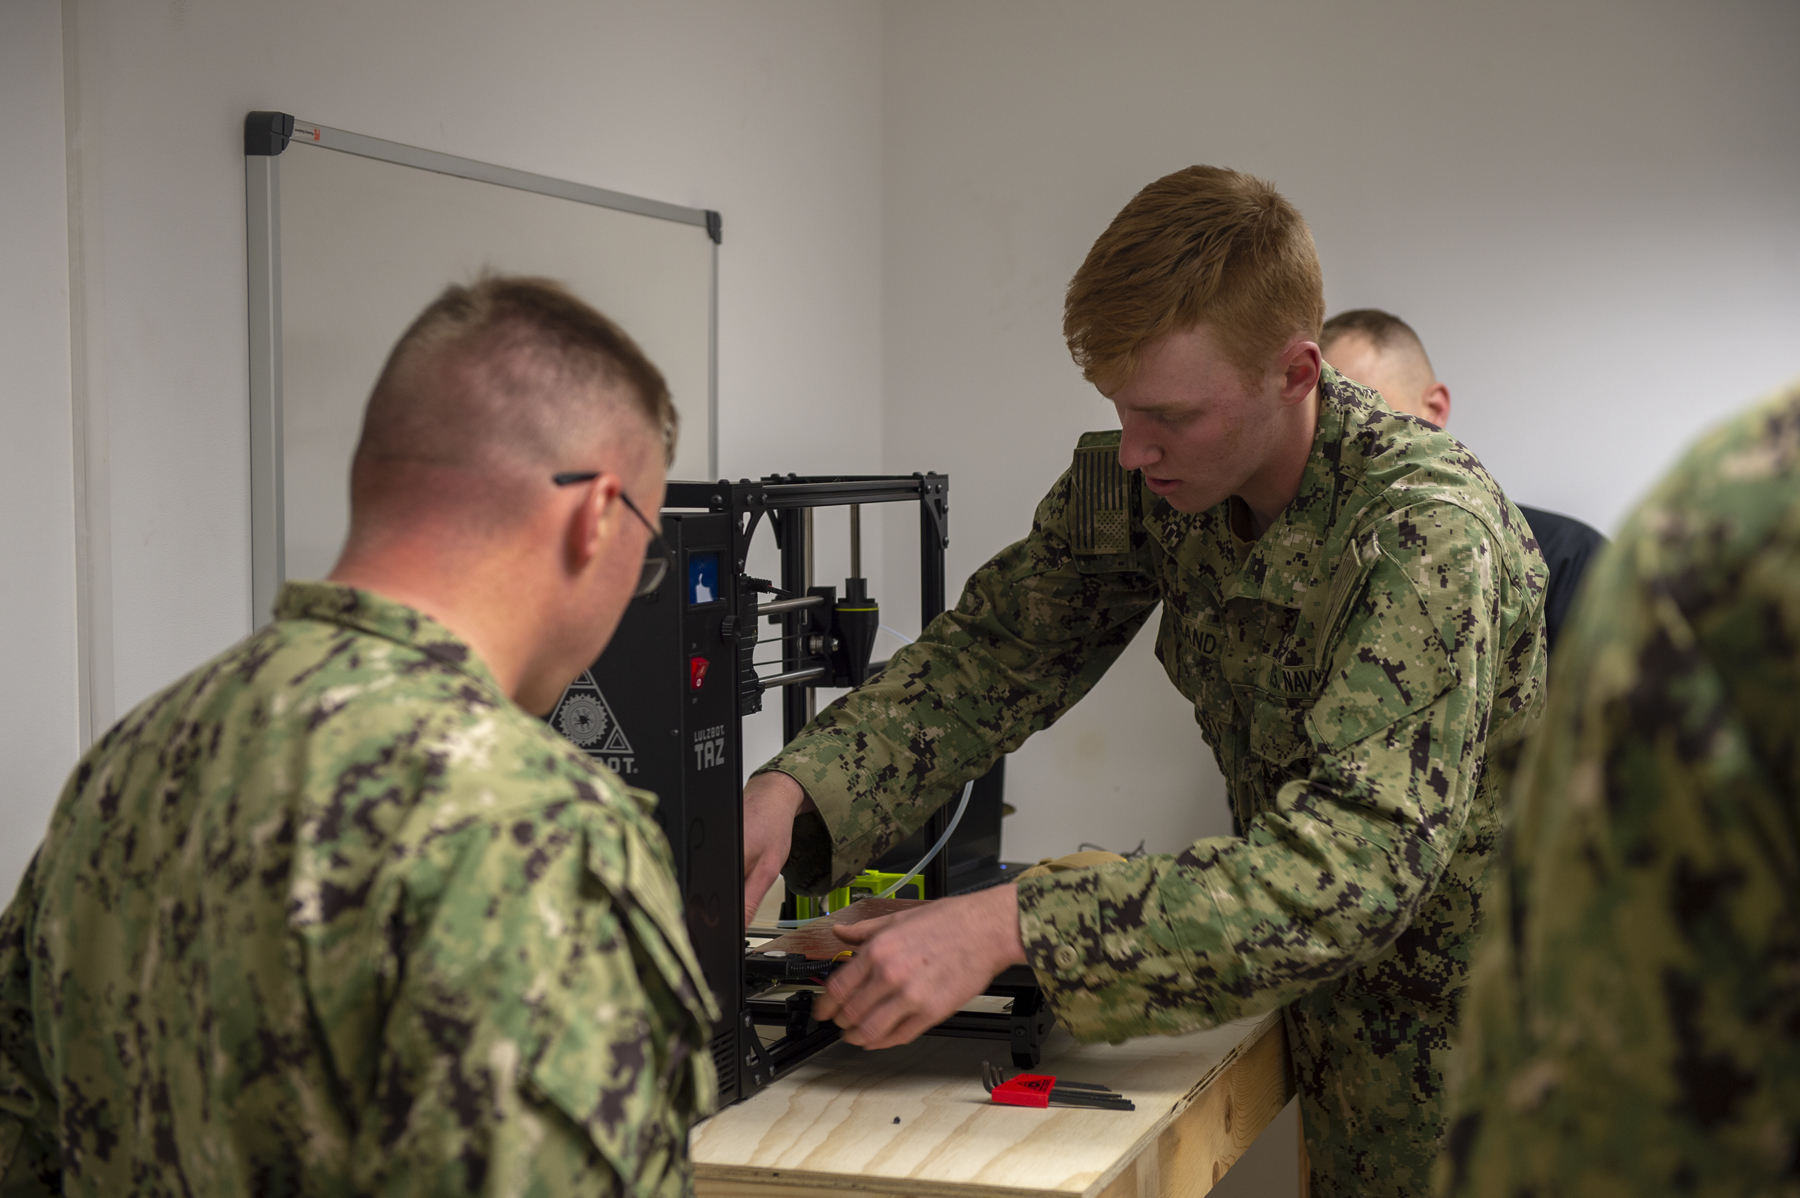 ROTA, Spain (March. 2, 2019) Seabees assigned to Naval Mobile Construction Battalion (NMCB) 133 conduct training with a 3-D printer onboard Naval Station Rota, Spain. NMCB-133 is forward deployed to execute construction, humanitarian and foreign assistance, and theater security cooperation in the U.S. 6th Fleet area of operations. (U.S. Navy photo by Mass Communication Specialist 2nd Class George M. Bell/Released)